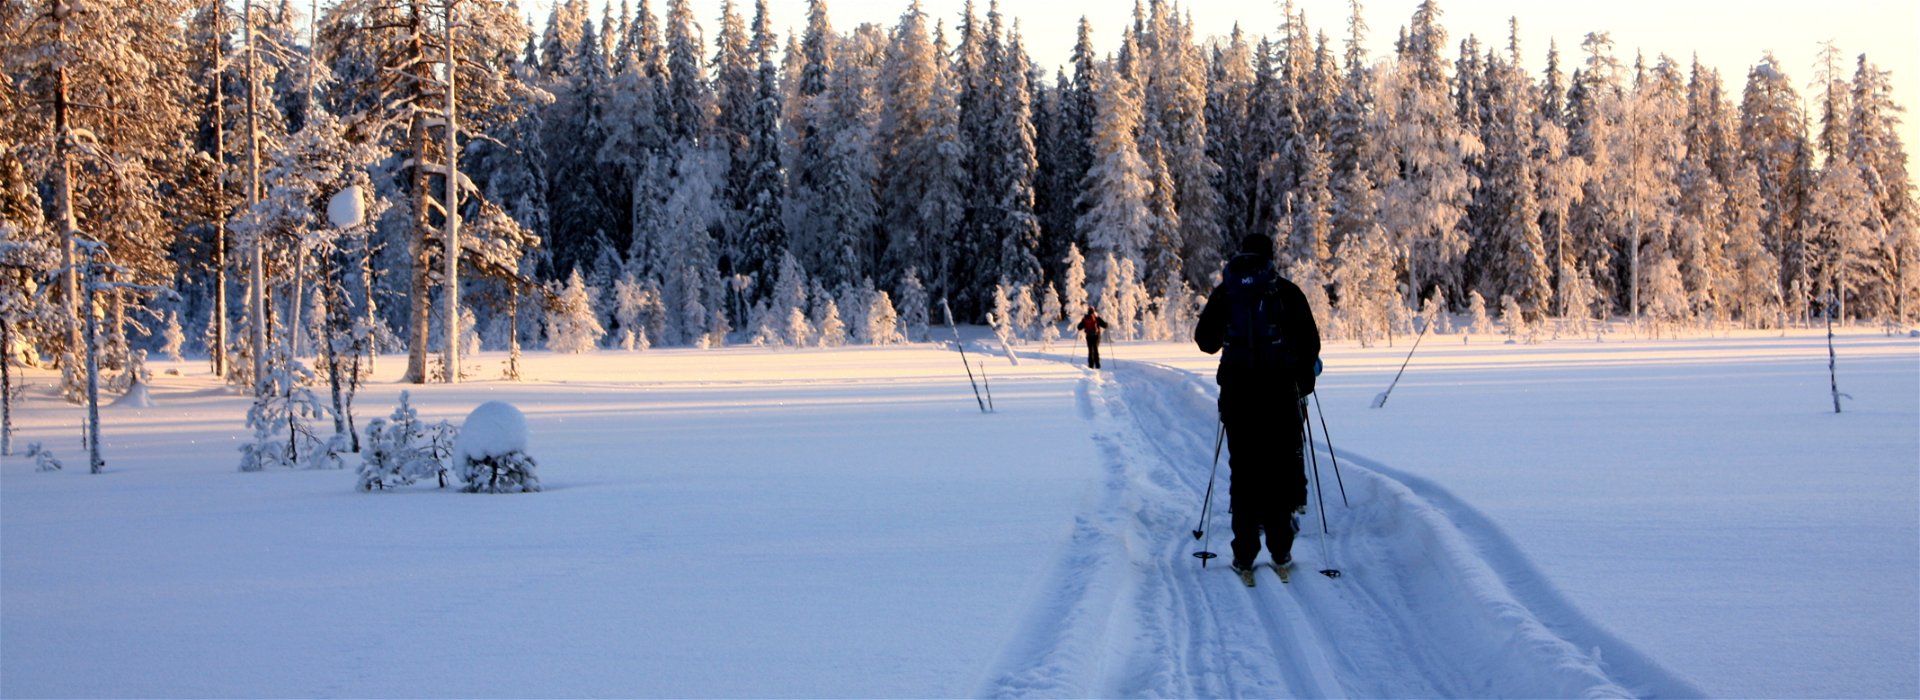 11 lessons learned - Skiing the Kings Trail, Sweden 